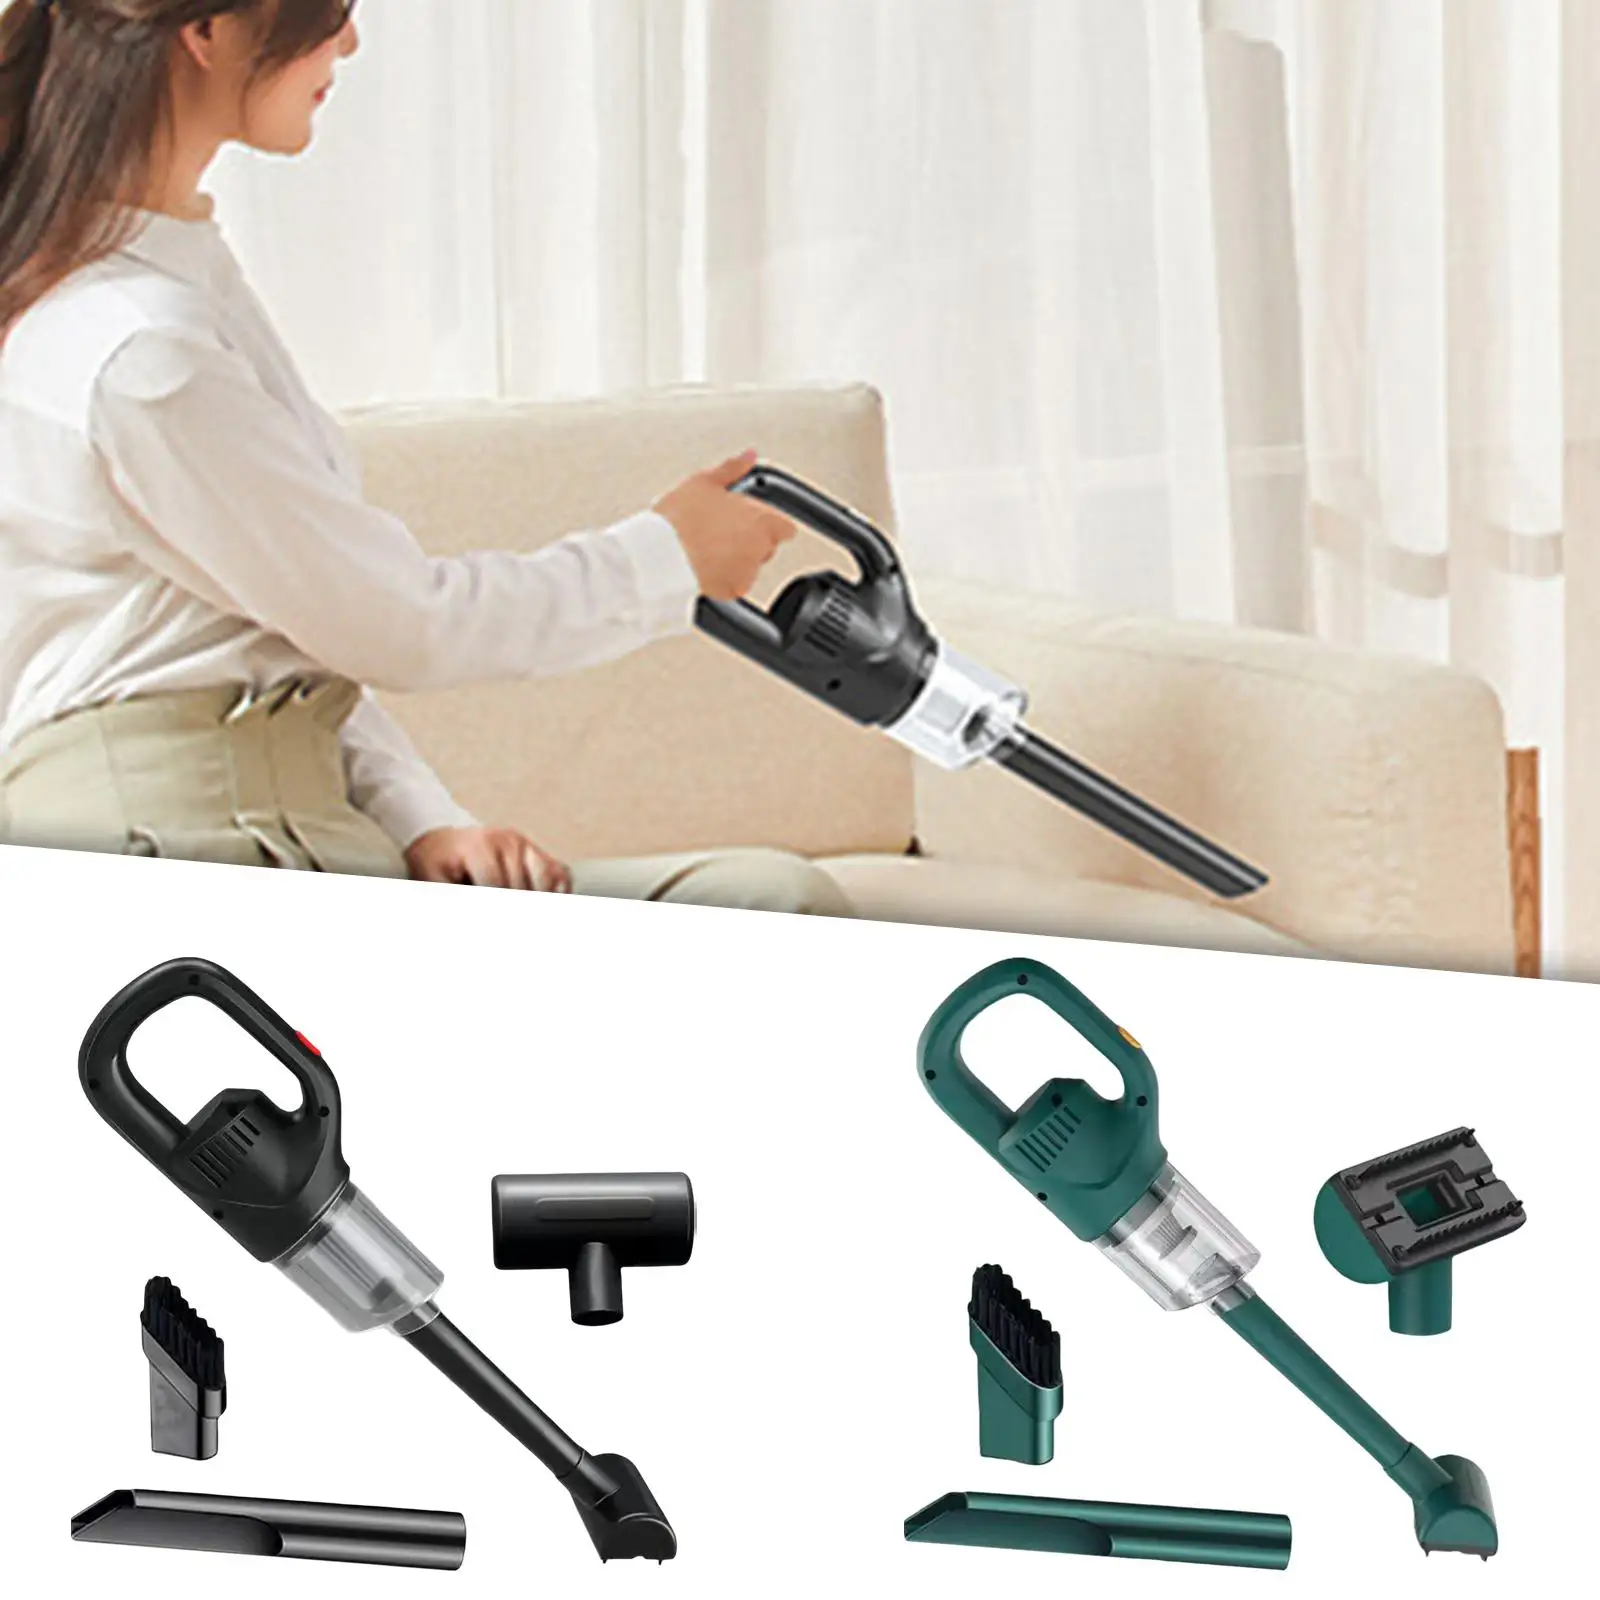 Handheld Vacuum Cleaner Powerful Suction USB Charging Quick Cleaning for Car